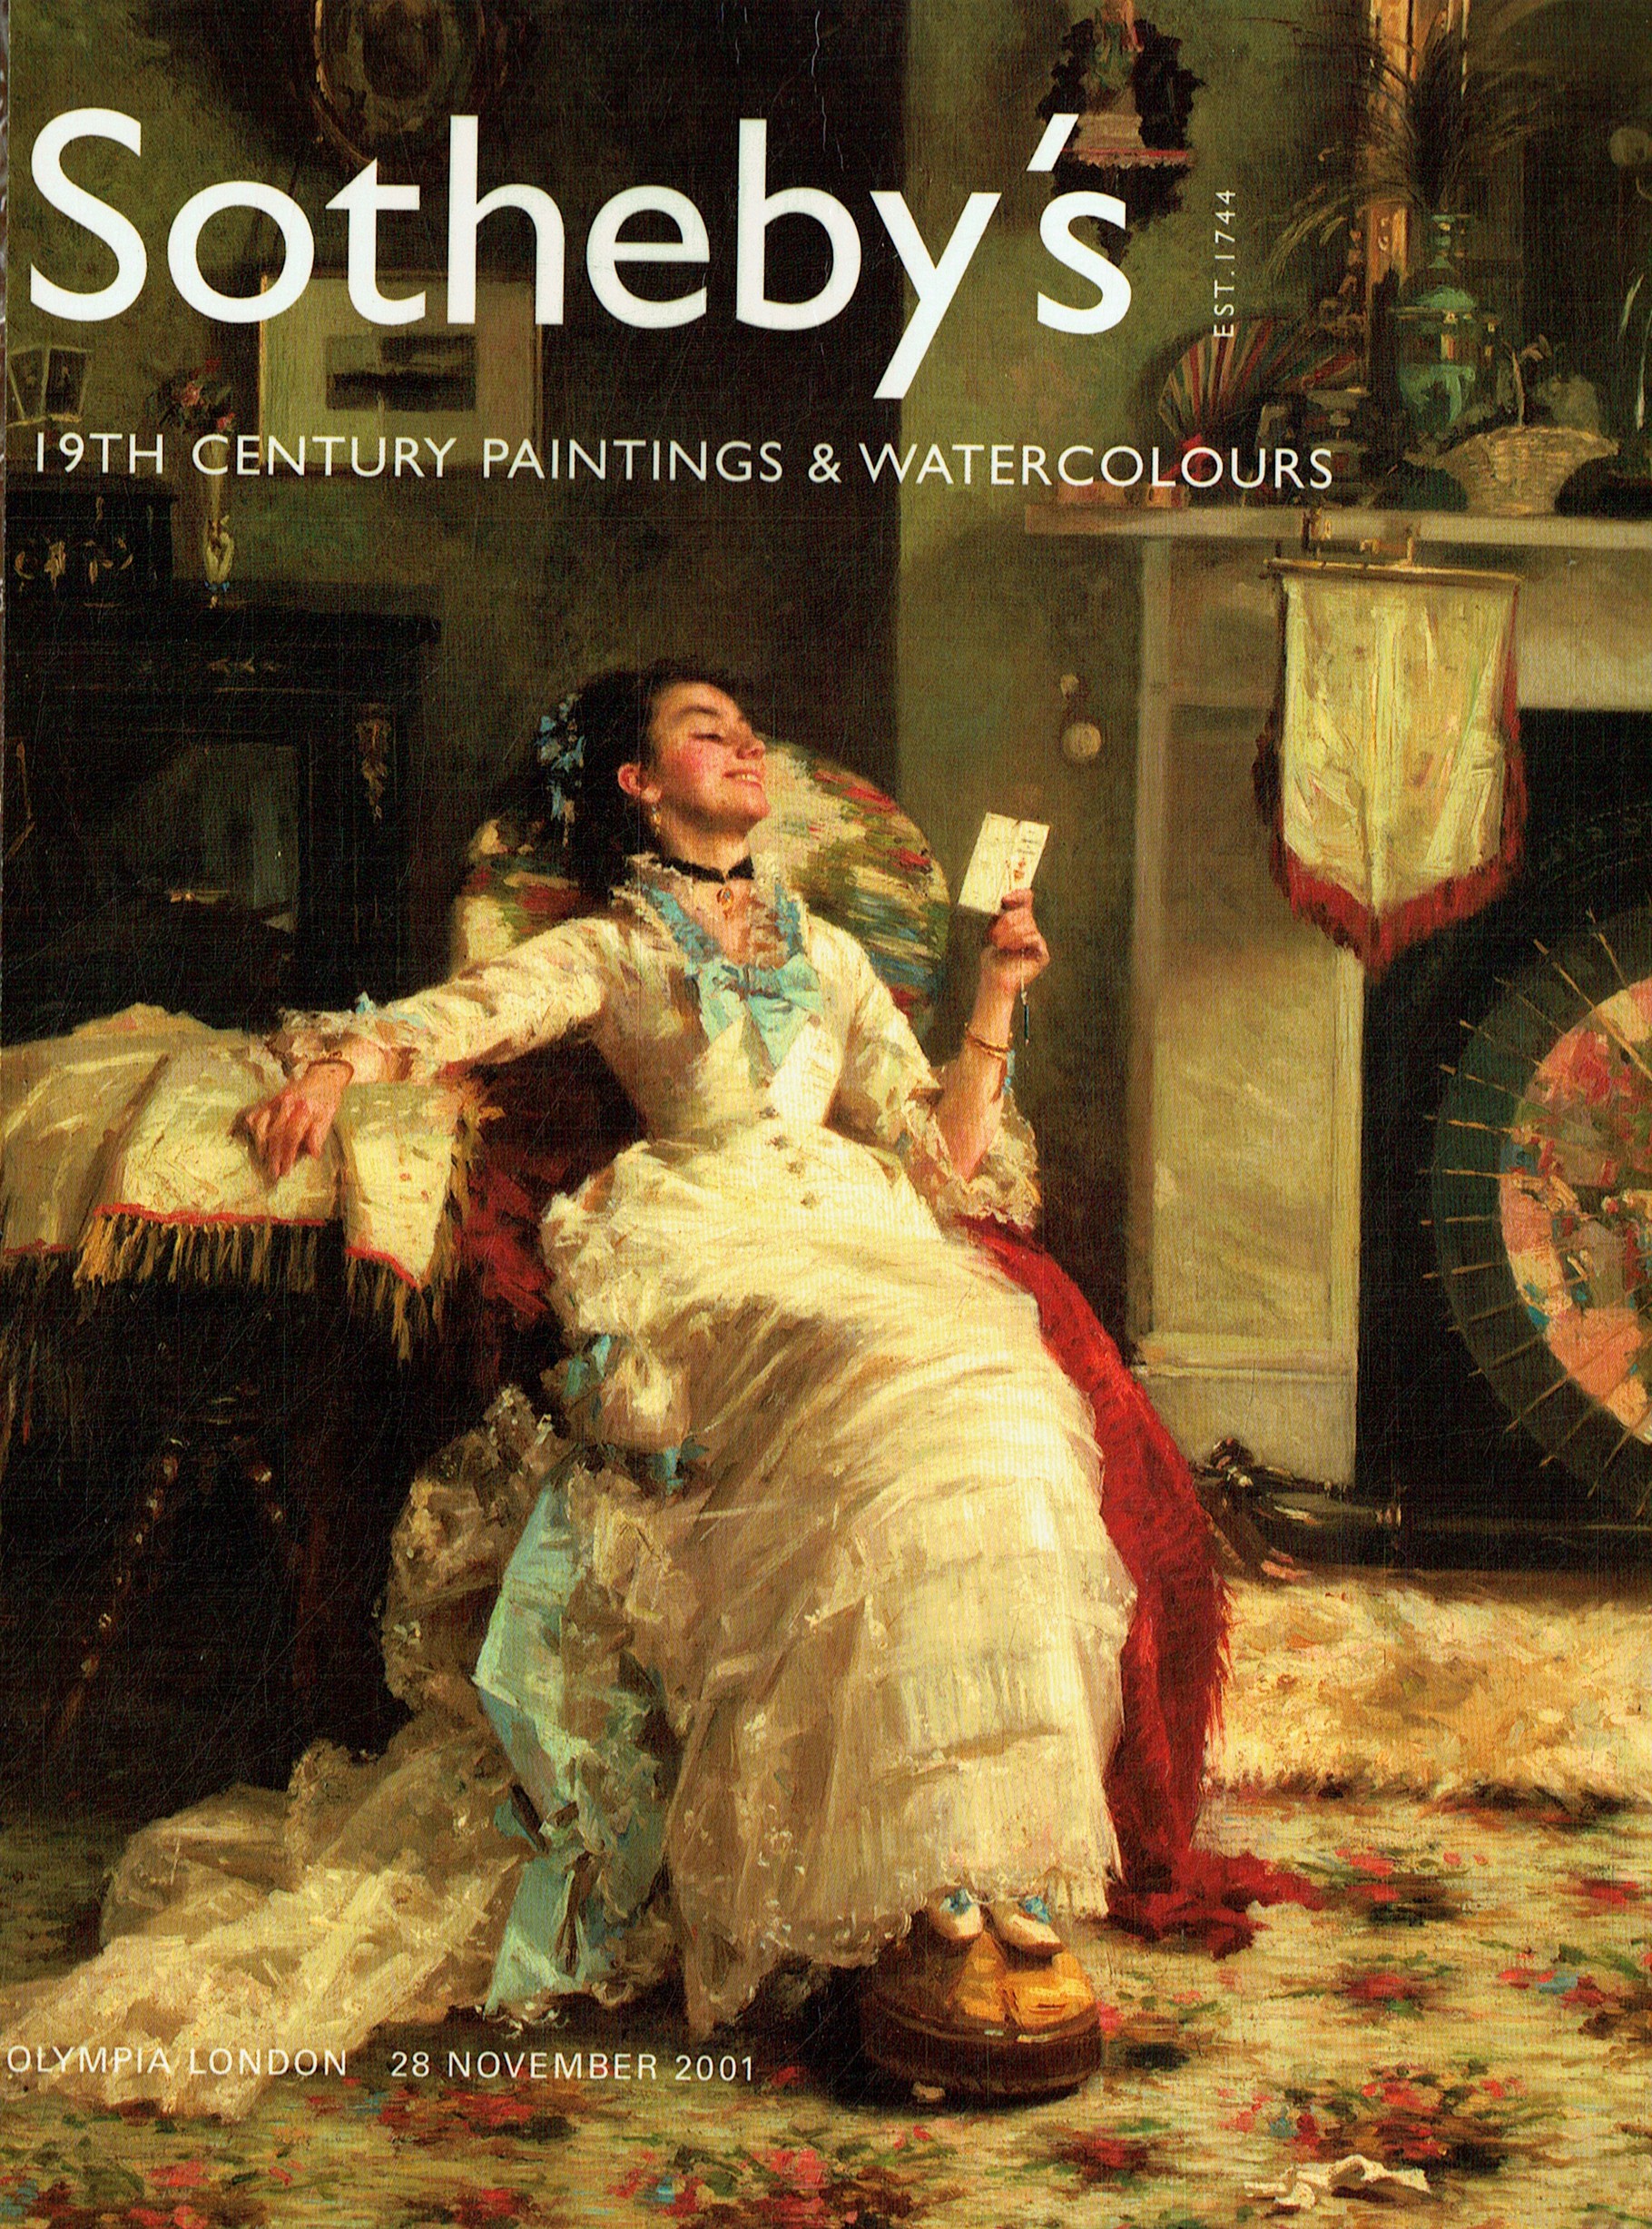 Sothebys November 2001 19th Century Paintings & Watercolours (Digitial Only)